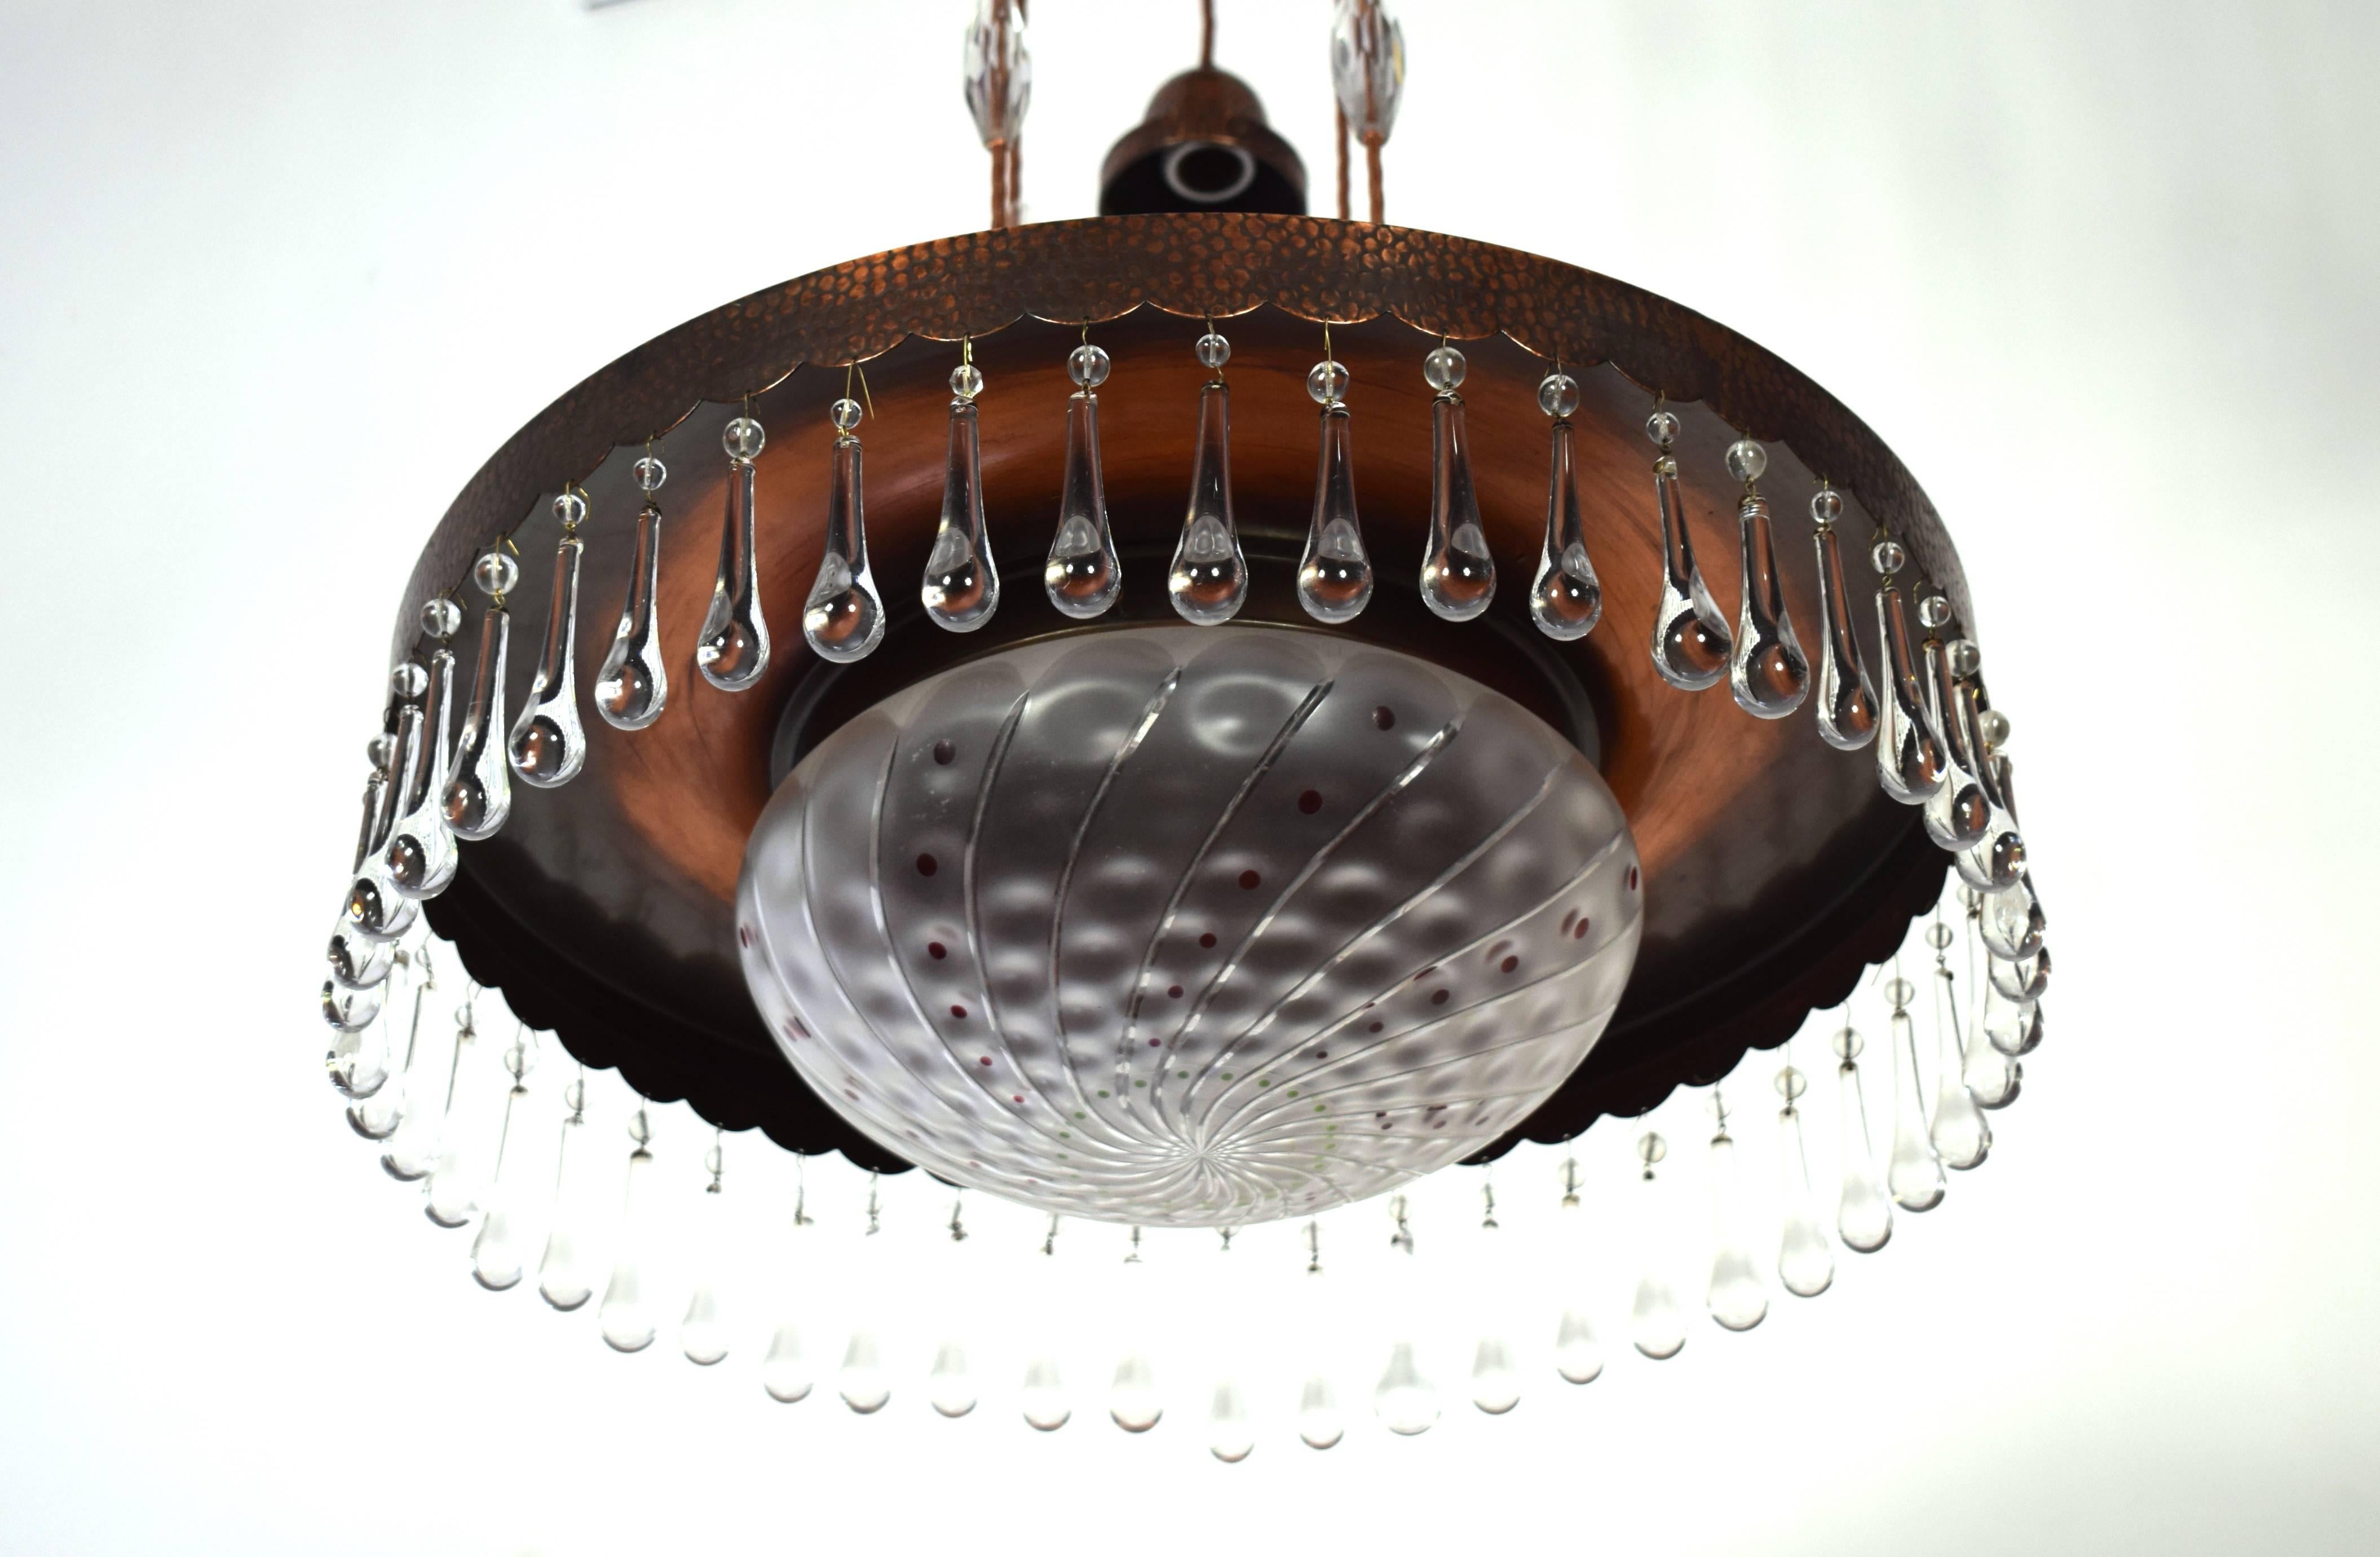 Vienna Secession chandelier with two handblown opalescent glass shades hanging from a decorative round dish in bronze.
Two opaline glass lamp shades. The glass shades were obtained and from Bohemian glass manufacturers, amongst them also the